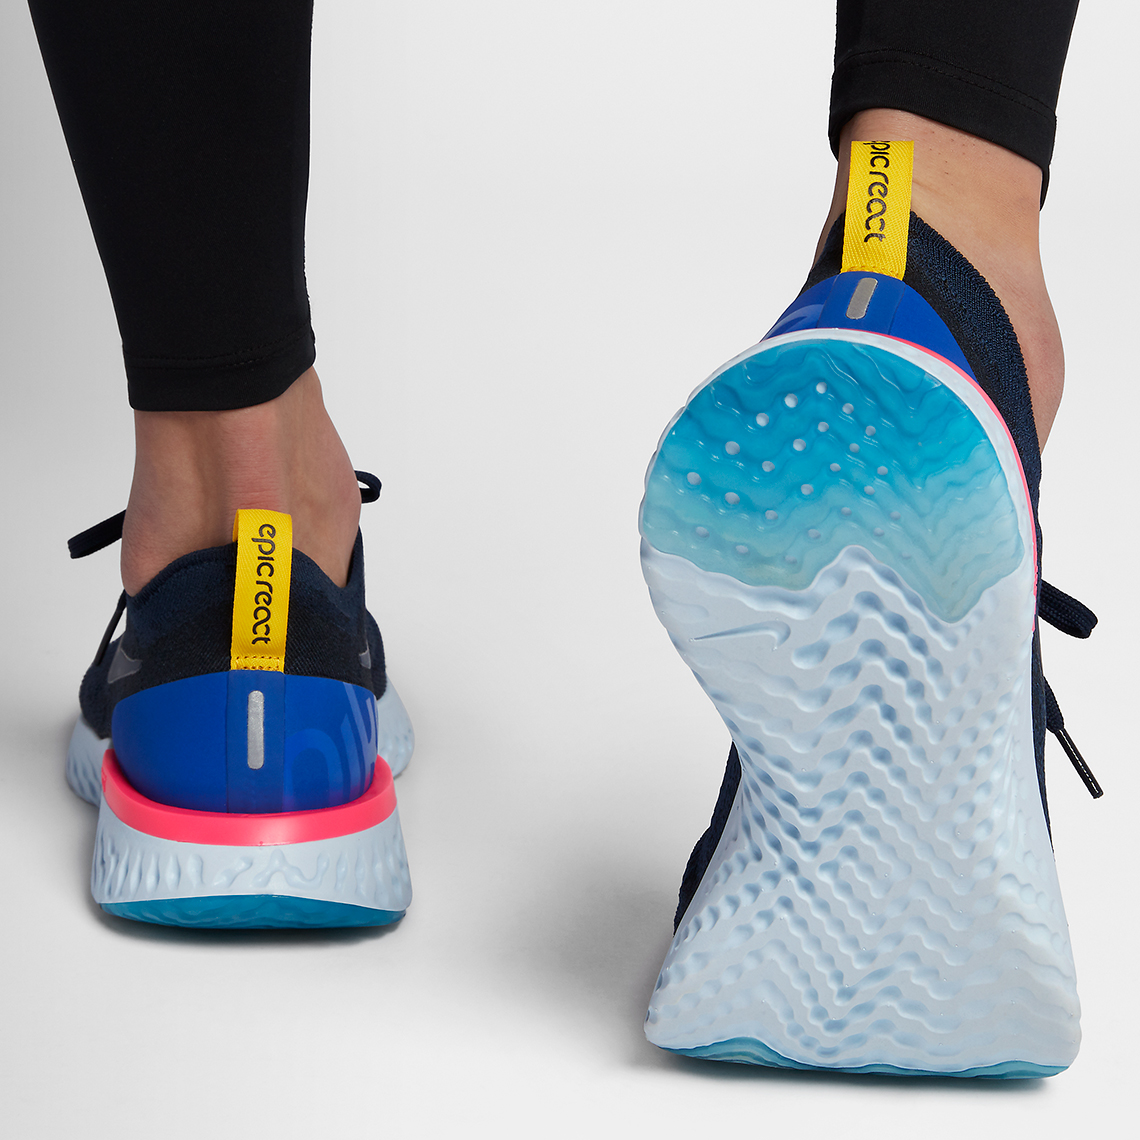 nike-epic-react-release-info-official-images-2.jpg